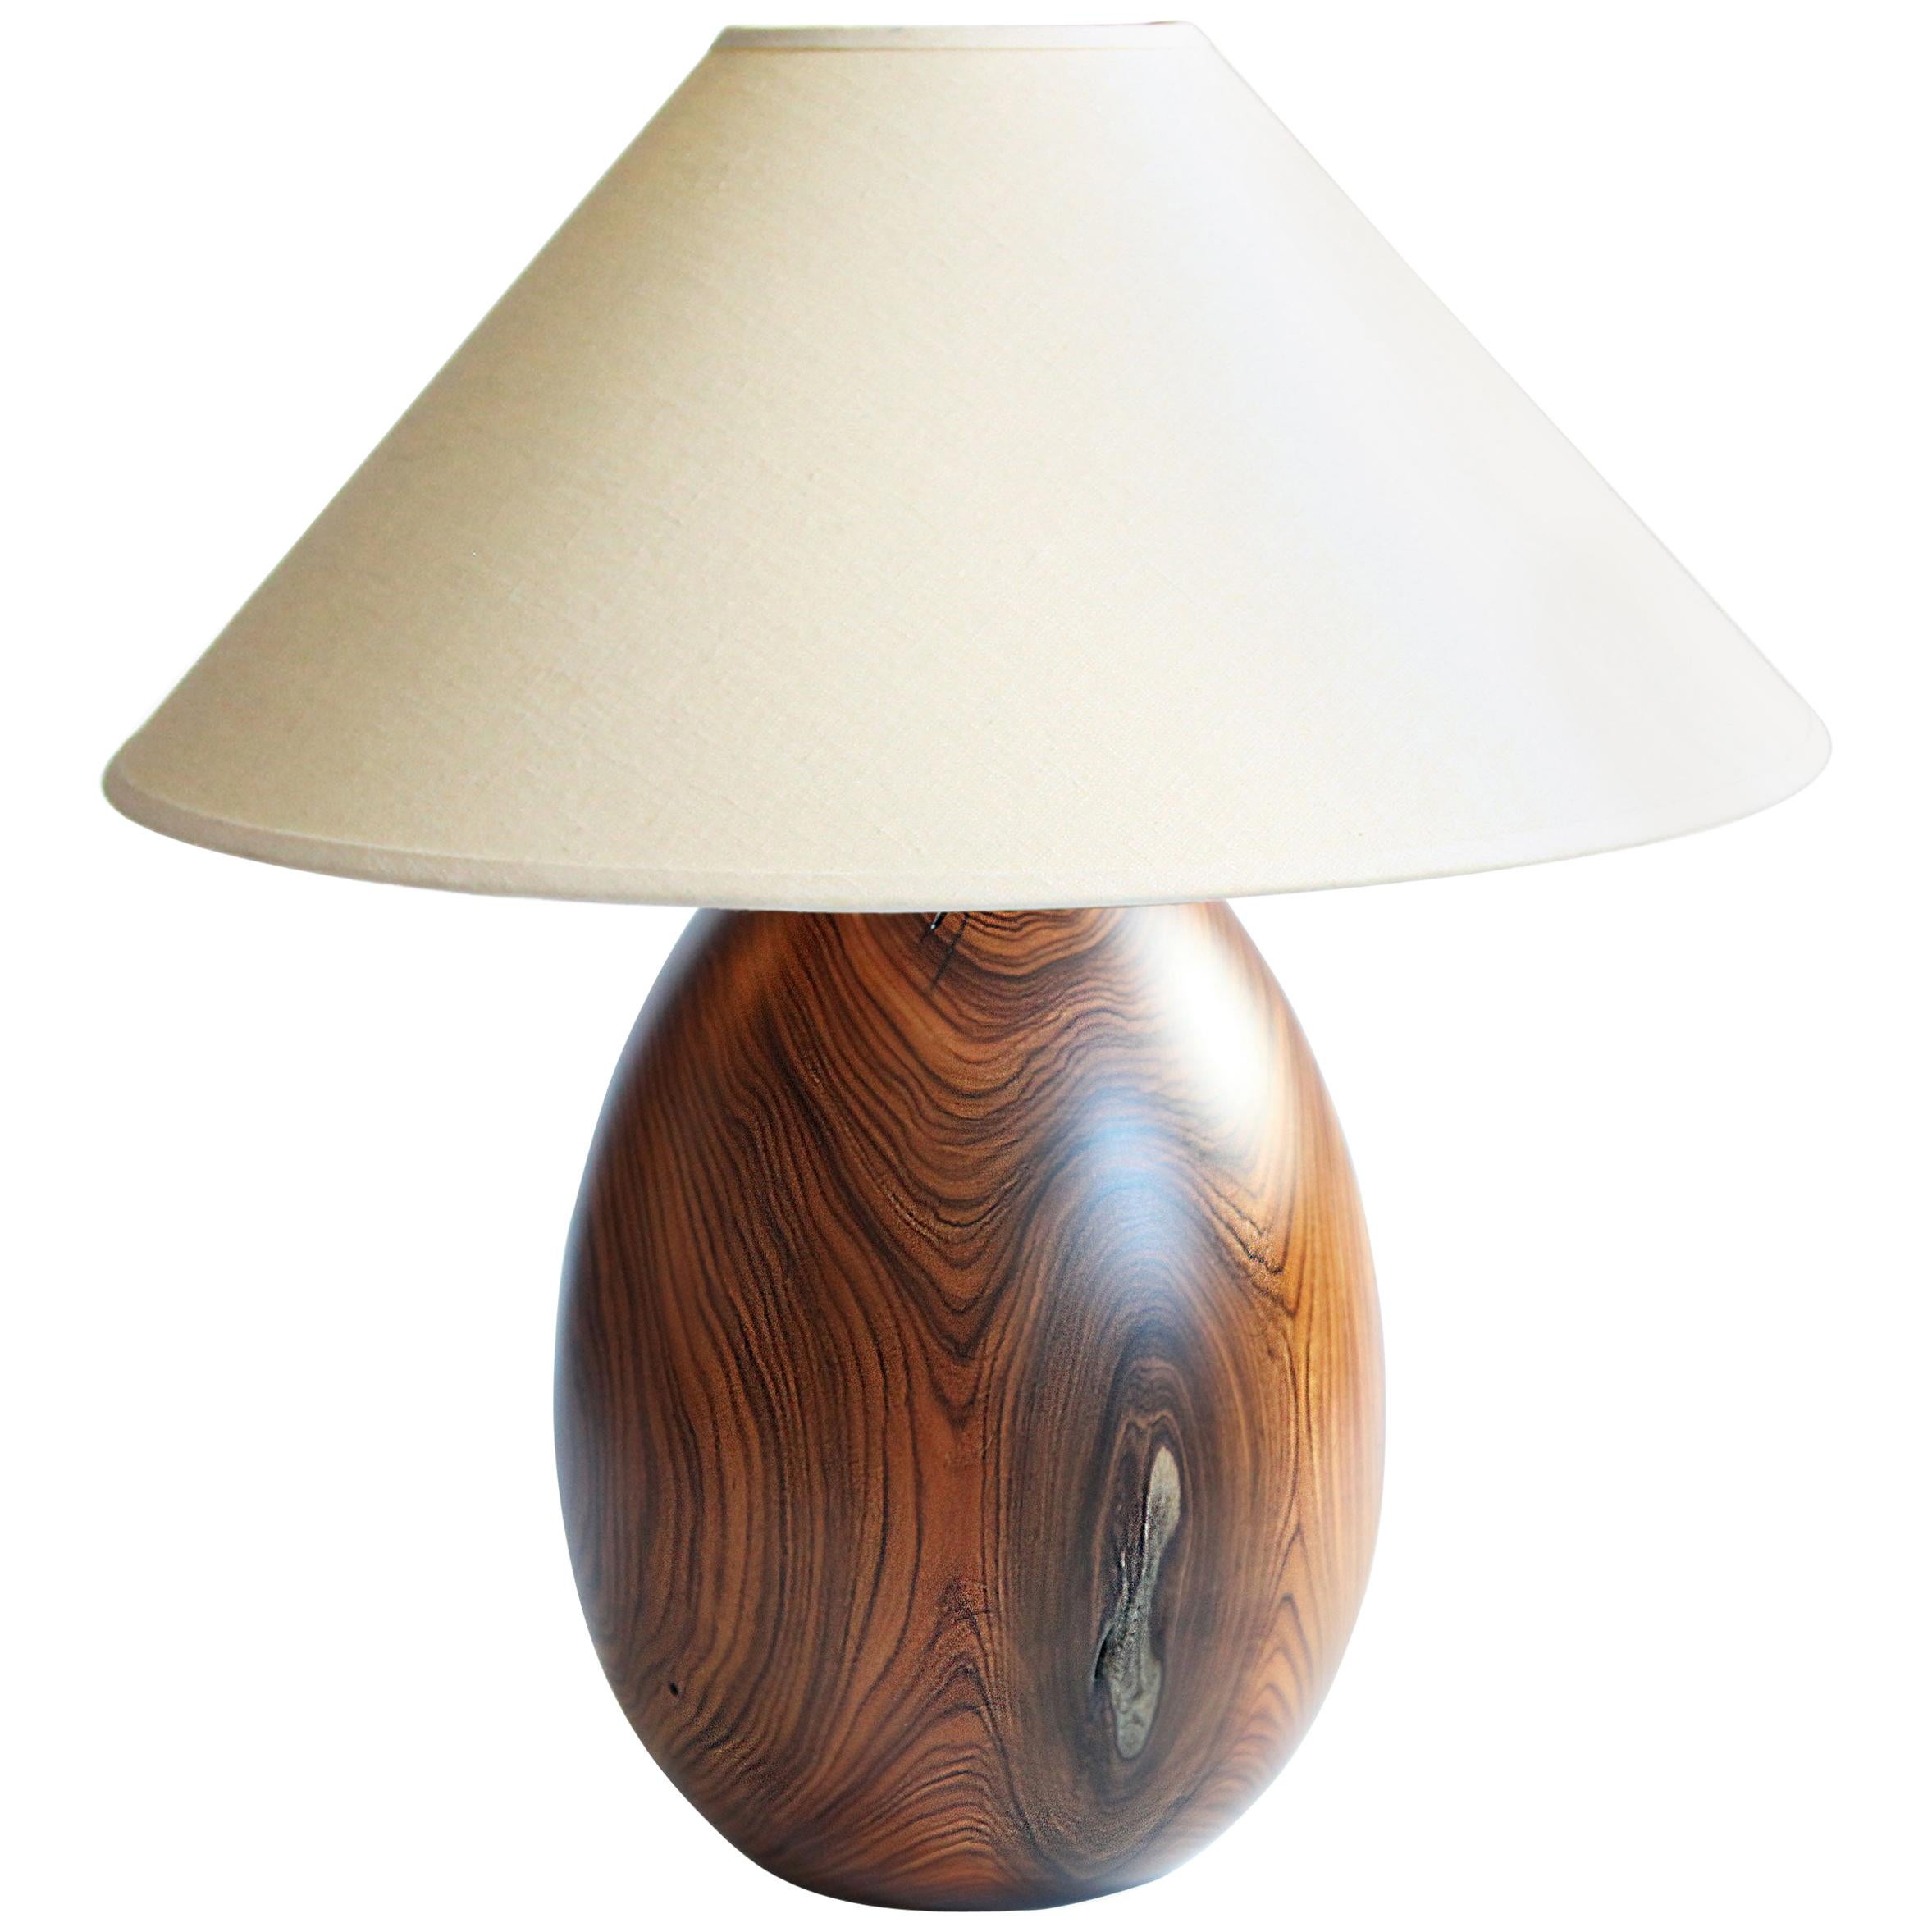 Tropical Hardwood Lamp and White Linen Shade, Medium, Árbol Collection, 31